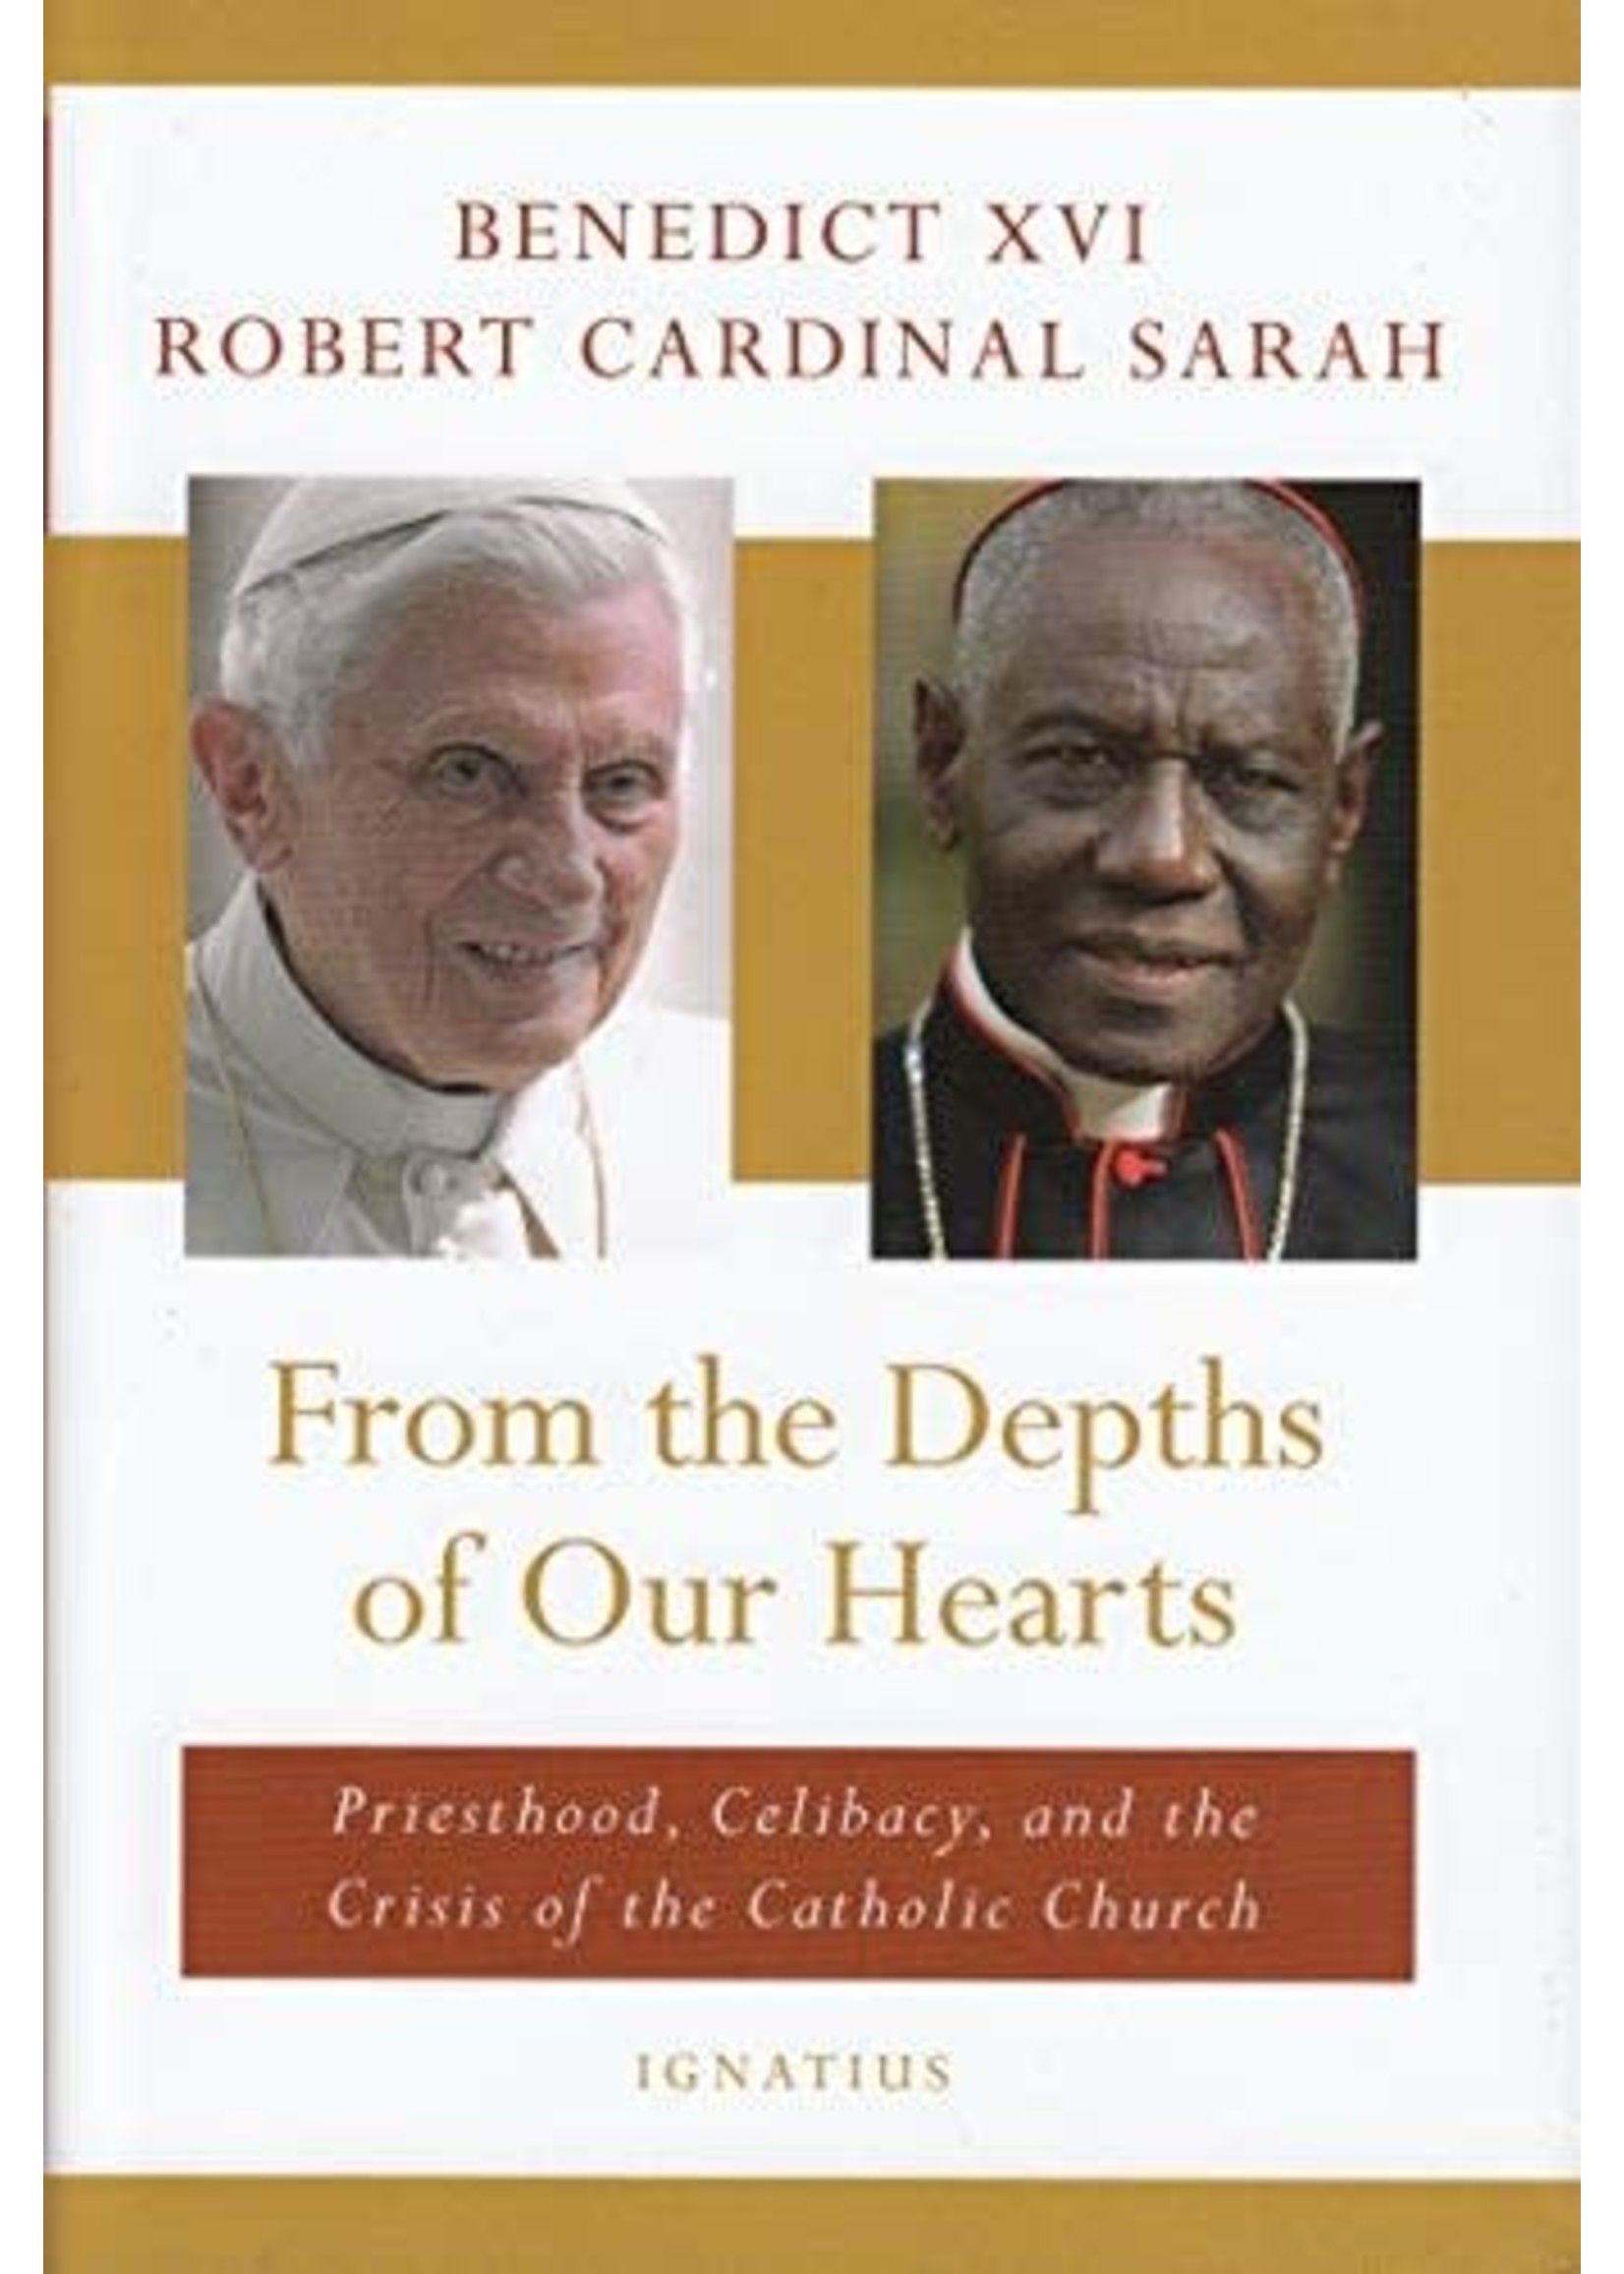 From the Depths of Our Hearts: Priesthood, Celibacy, and the Crisis of the Catholic Church